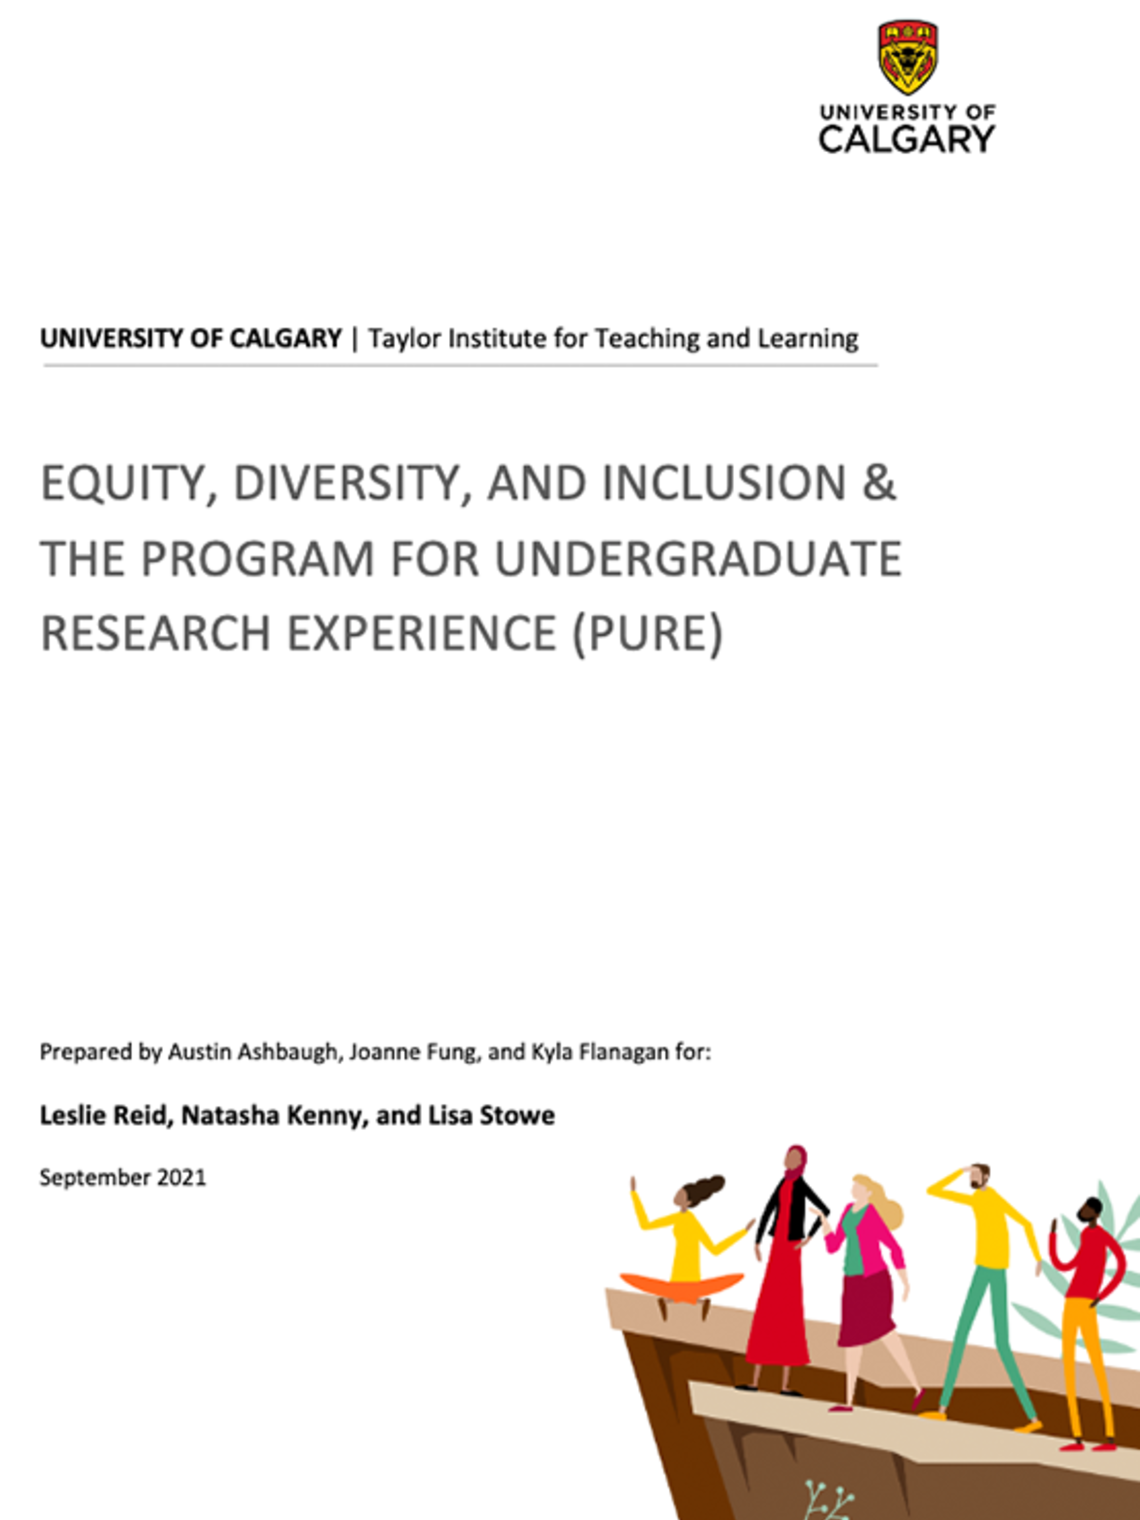 EQUITY, DIVERSITY, AND INCLUSION & THE PROGRAM FOR UNDERGRADUATE RESEARCH EXPERIENCE (PURE) report